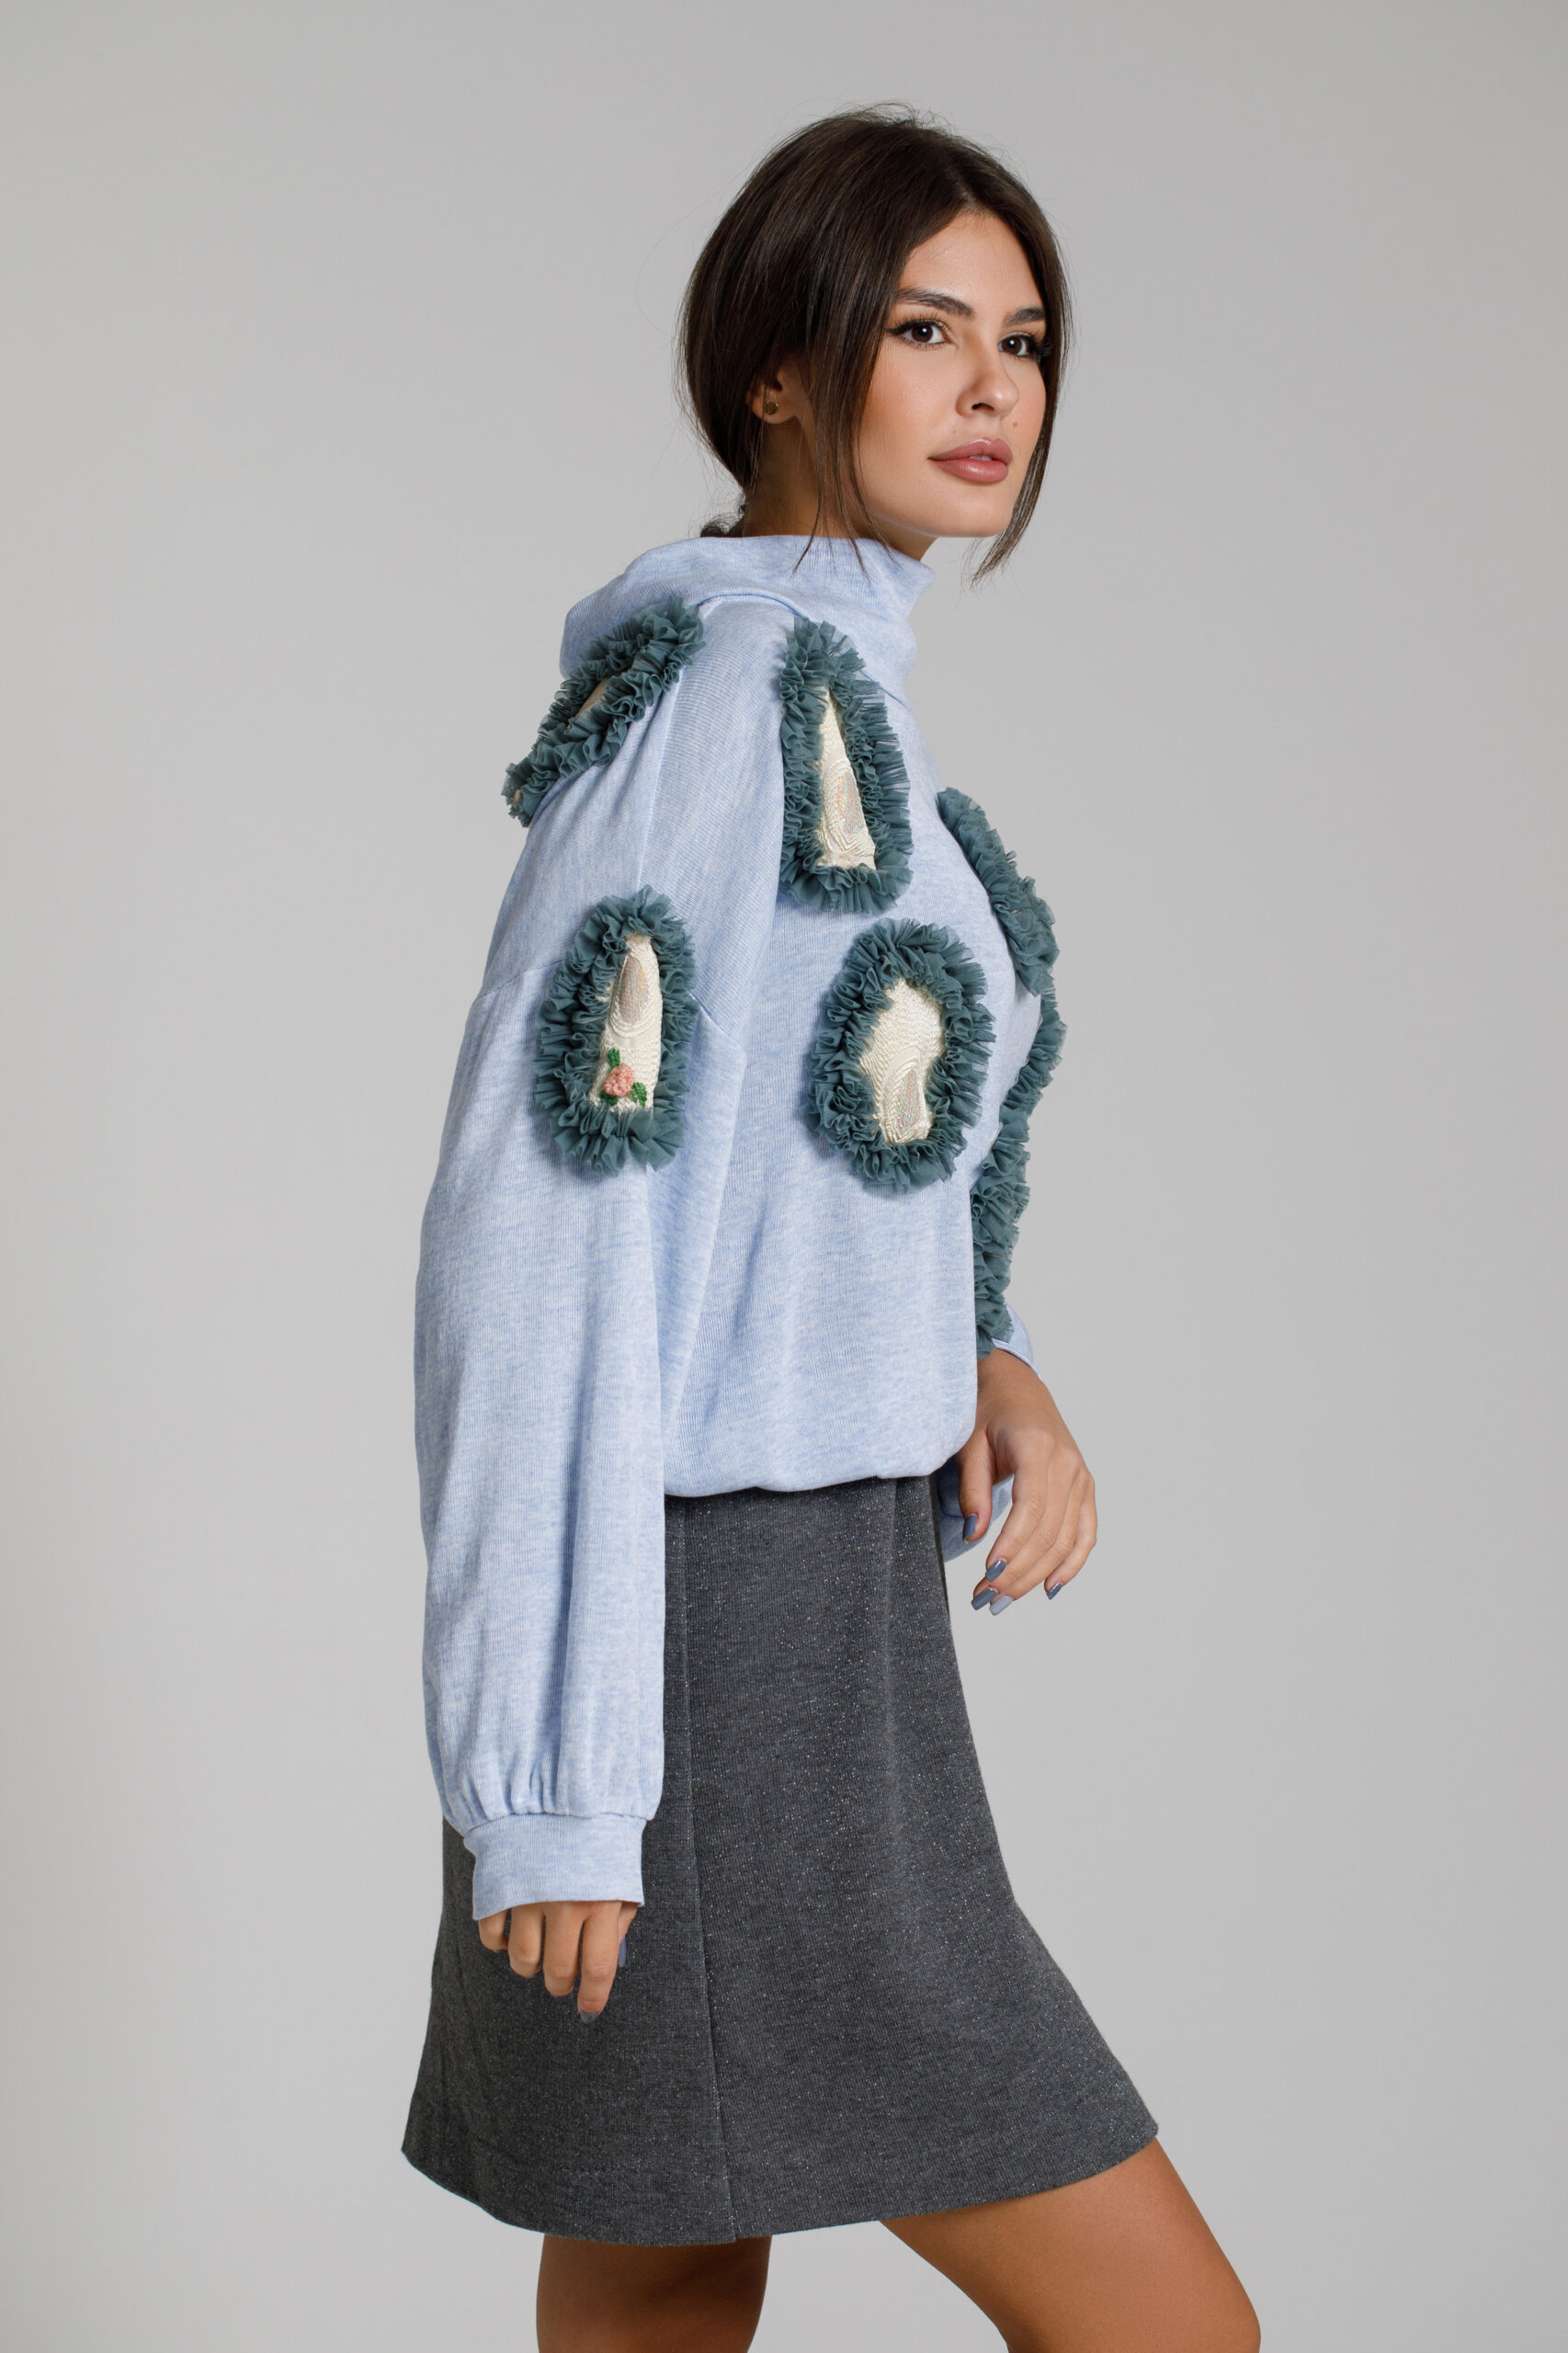 LIVY BLUE SWEATER with brocade and gray tulle applications. Natural fabrics, original design, handmade embroidery